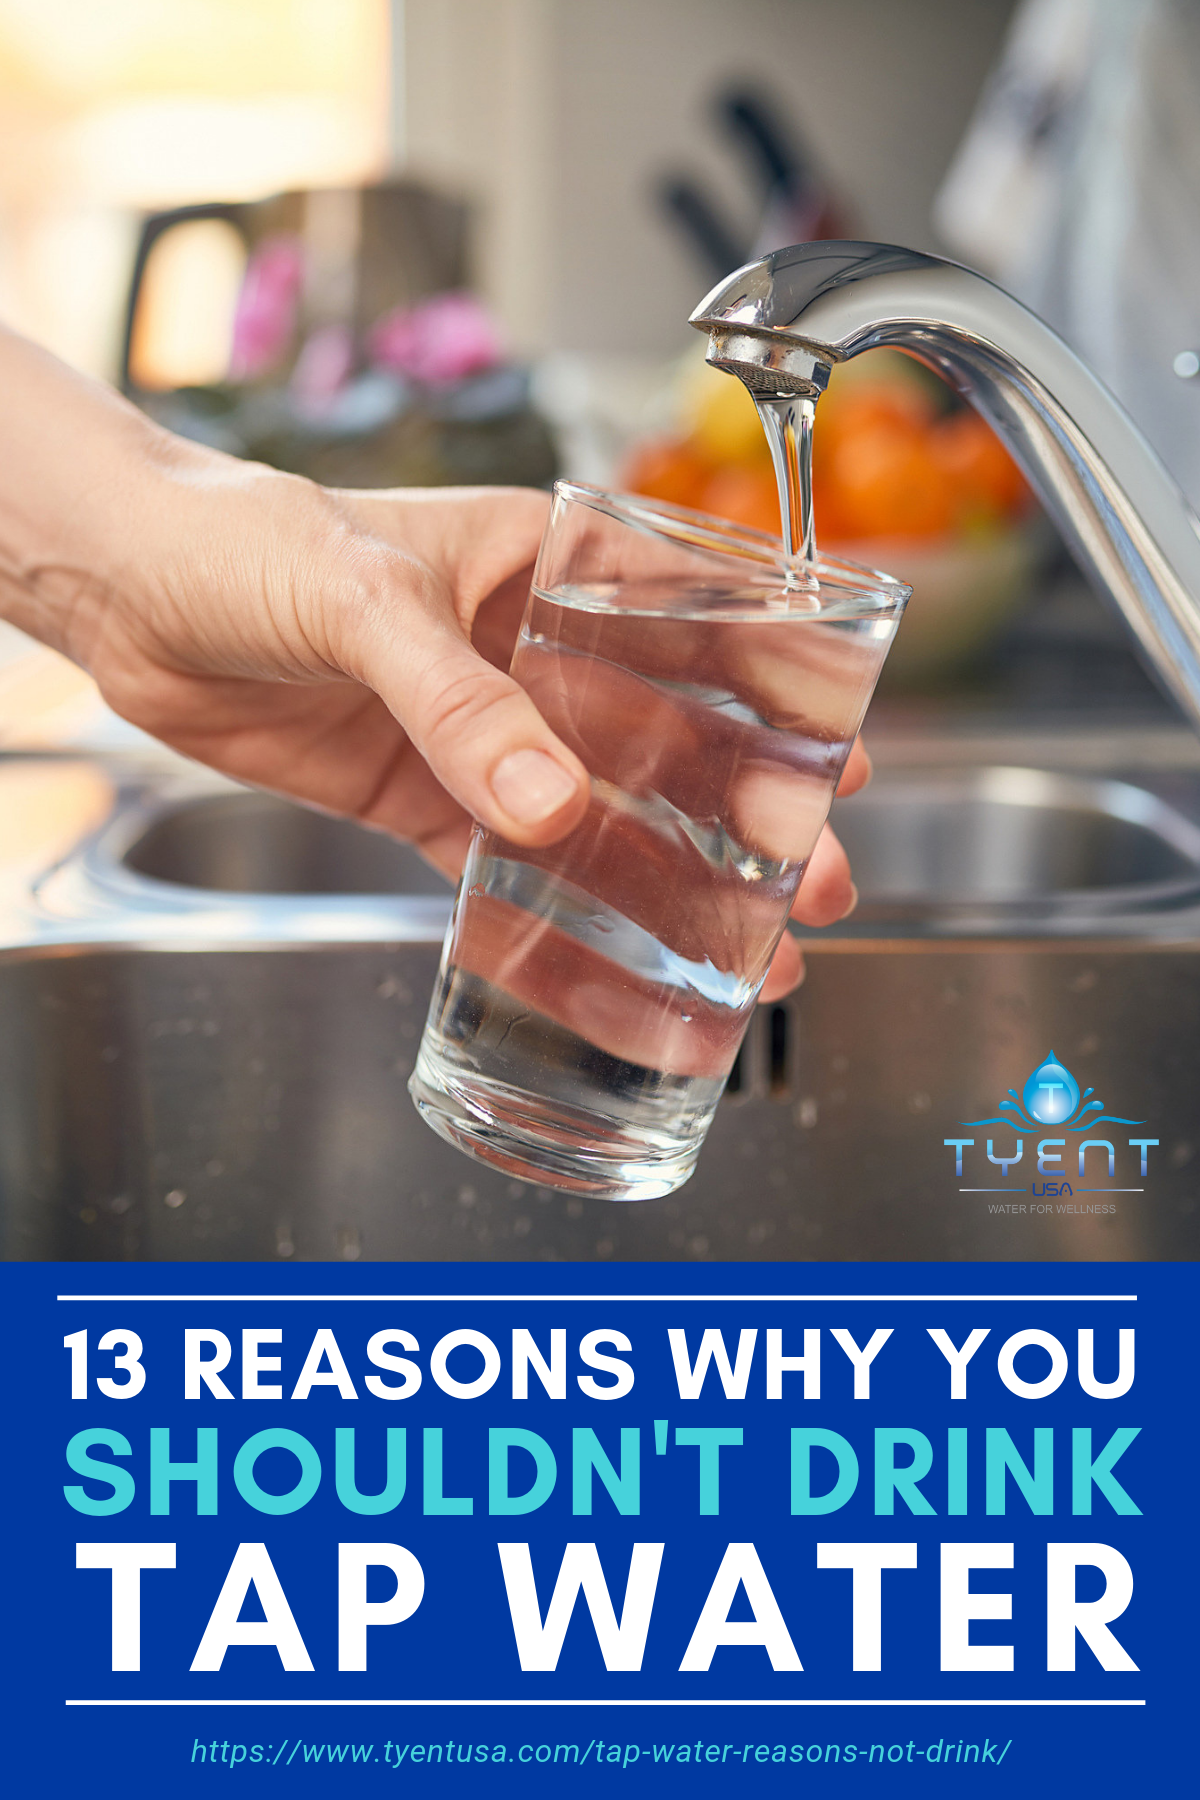 13 Reasons Why You Shouldn’t Drink Tap Water https://www.tyentusa.com/blog/tap-water-reasons-not-drink/